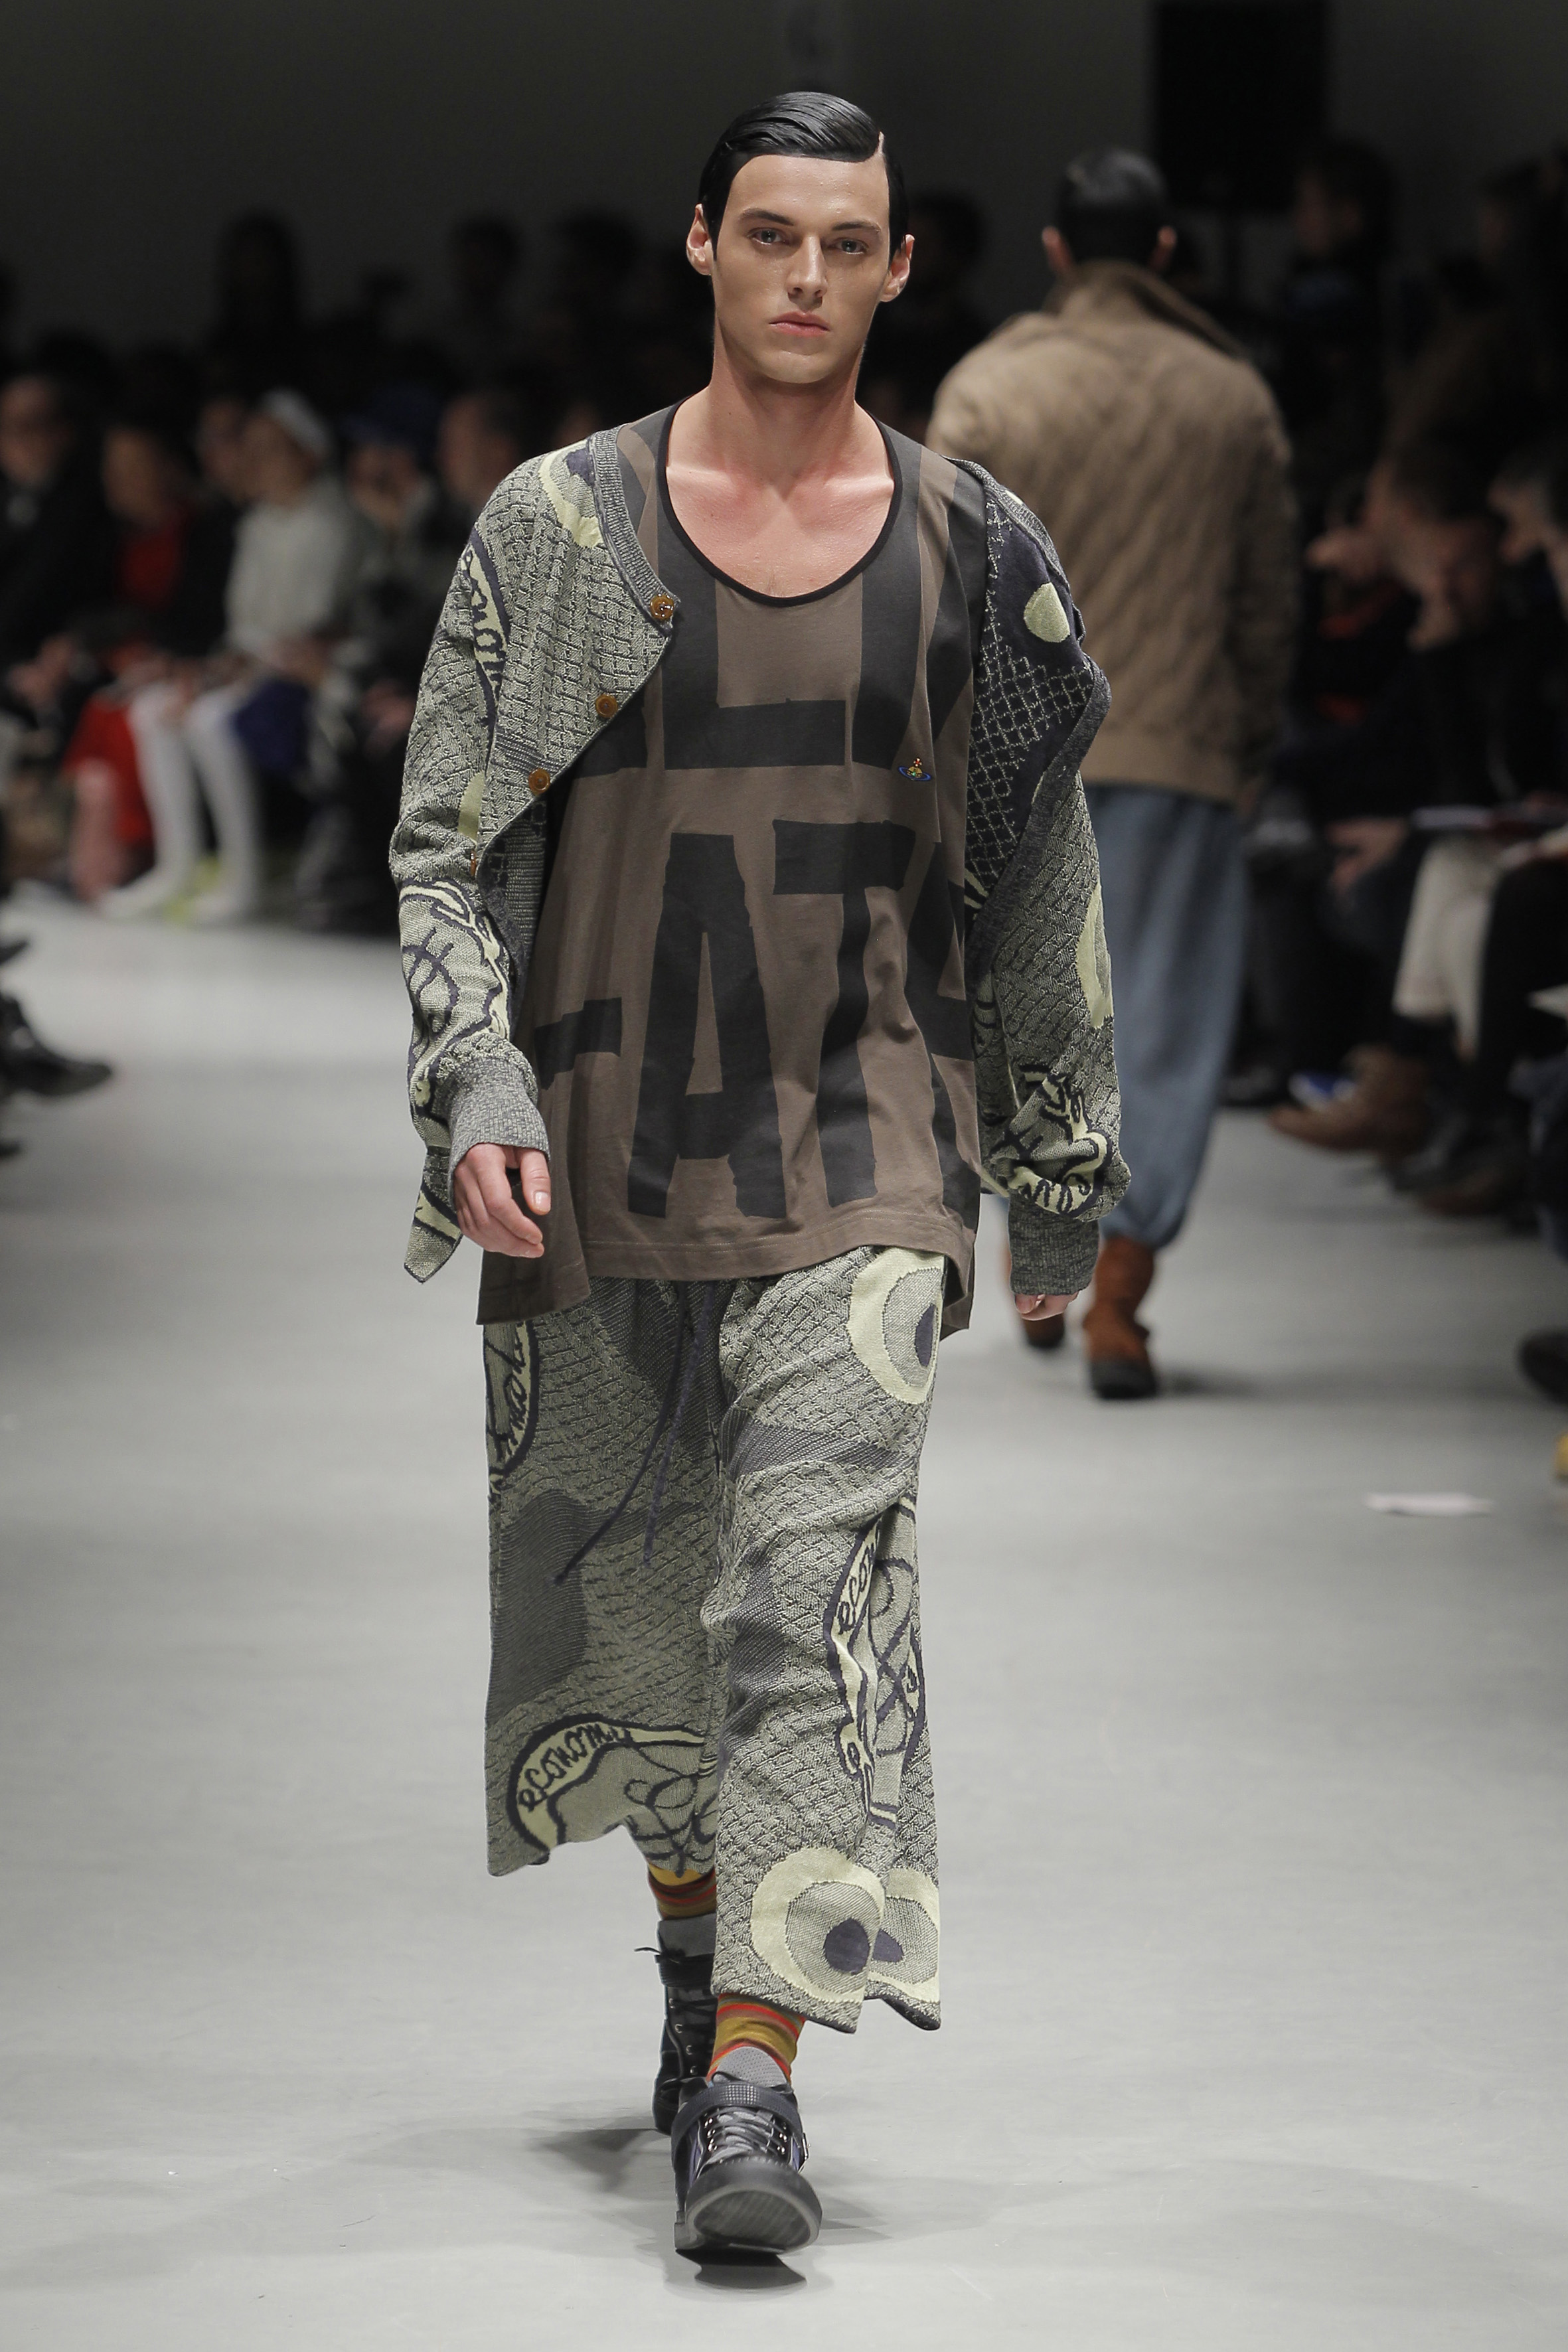 VIVIENNE WESTWOOD LAUNCHES UNISEX COLLECTION FOR AW14-15 | CRASH